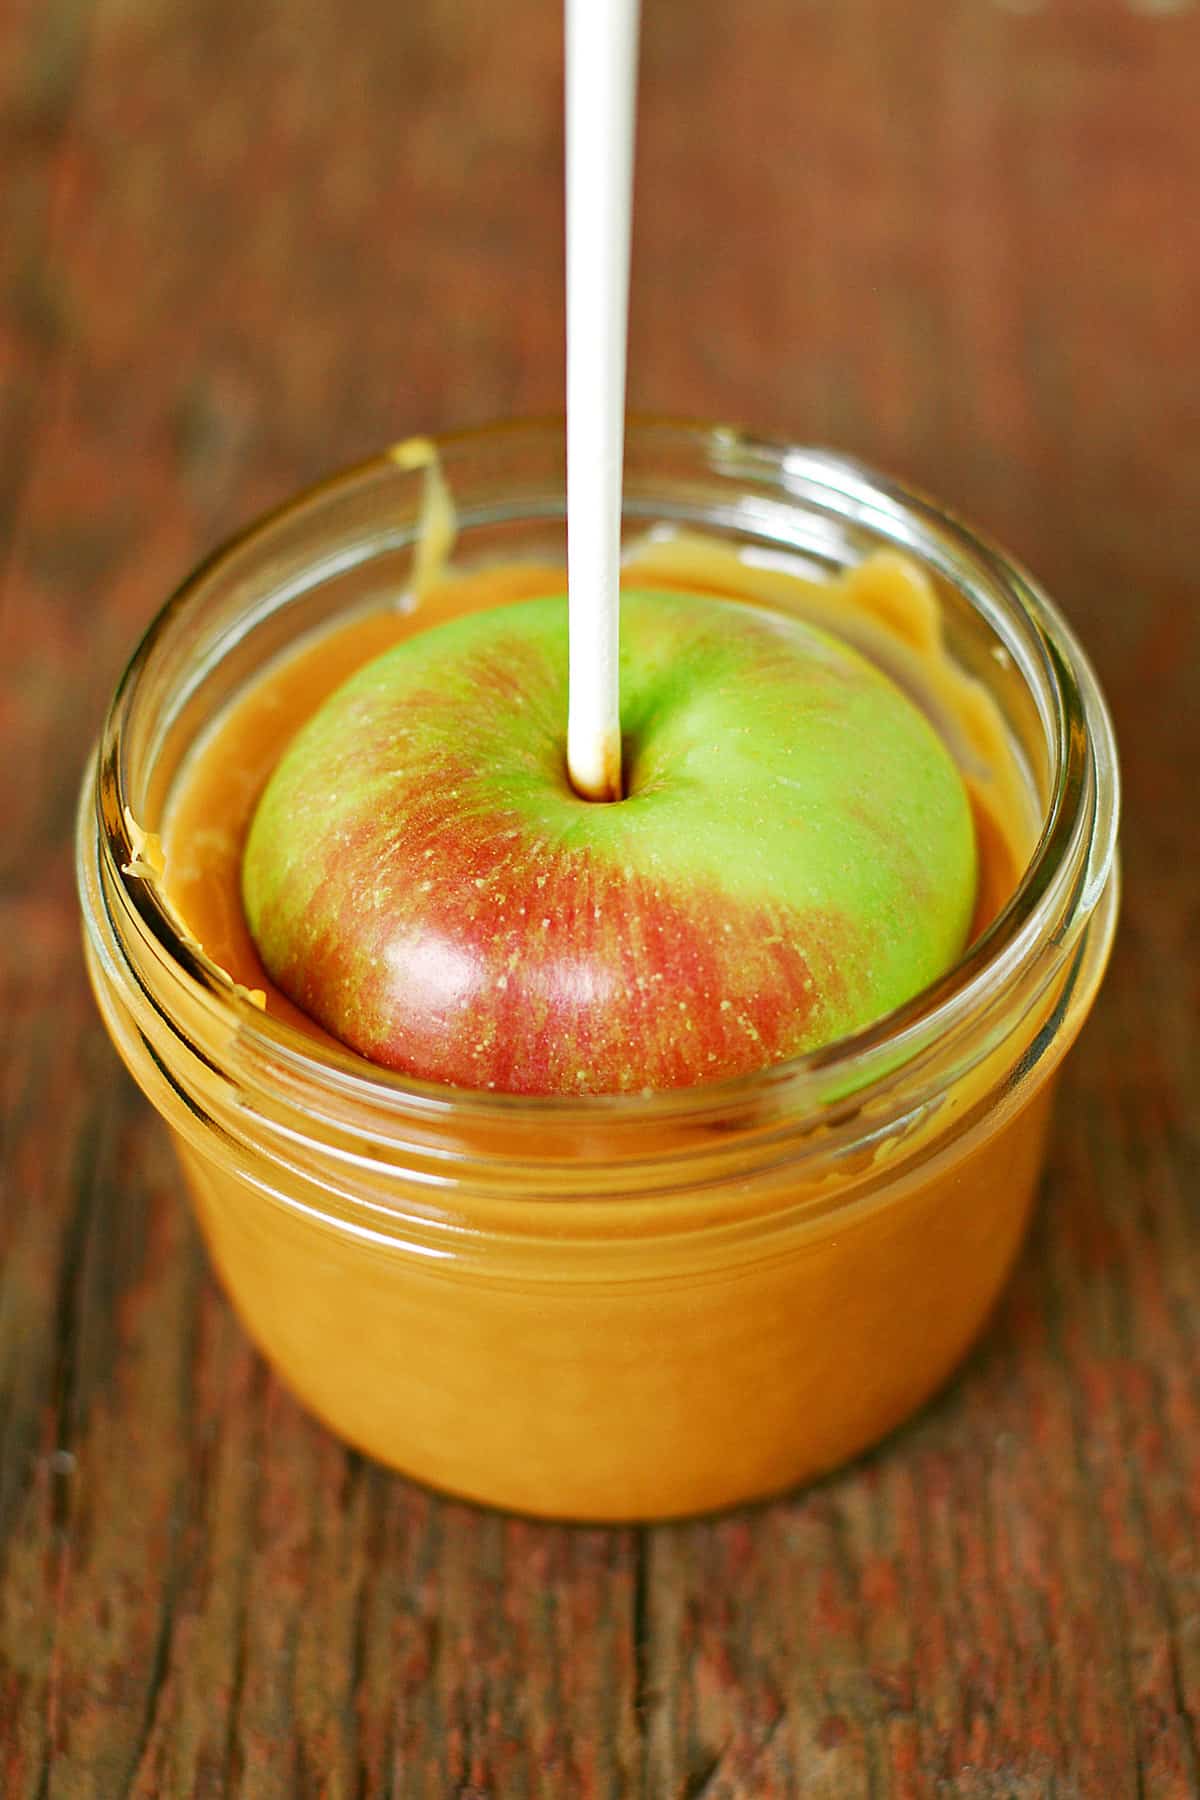 An apple on a stick dipped into melted caramel in a jar.